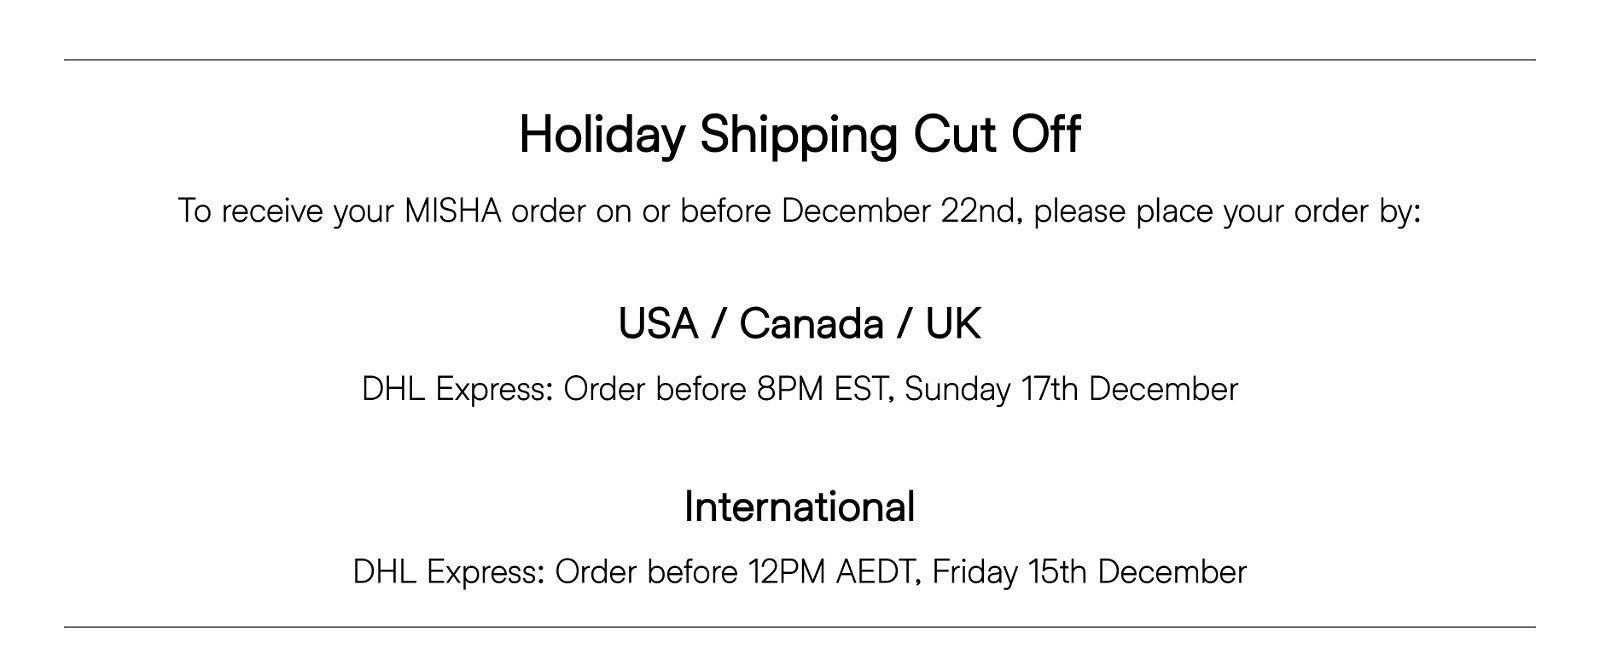 Holiday Cut Off Shipping Notice